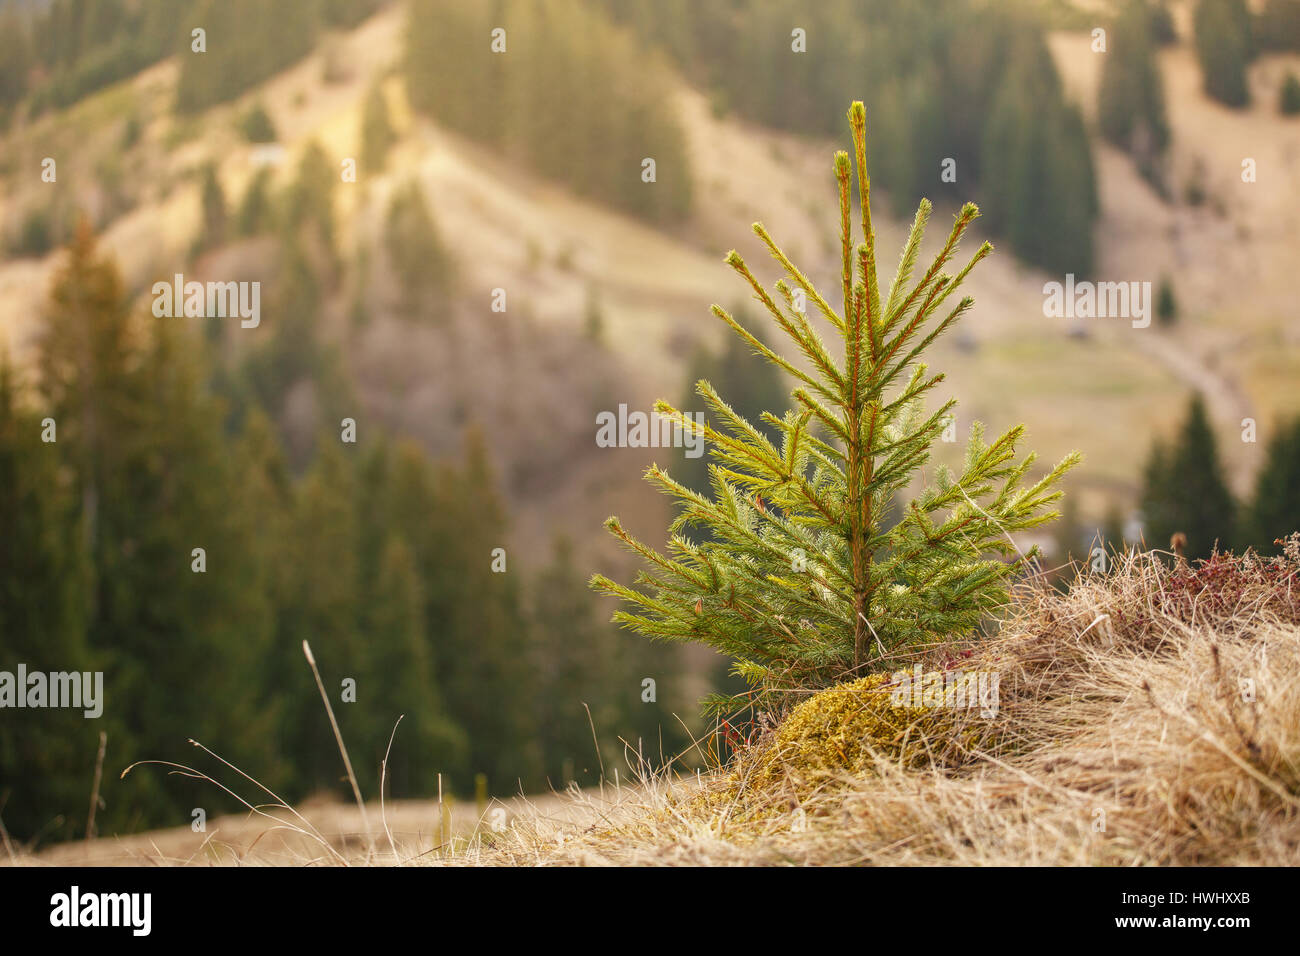 young pine tree Stock Photo